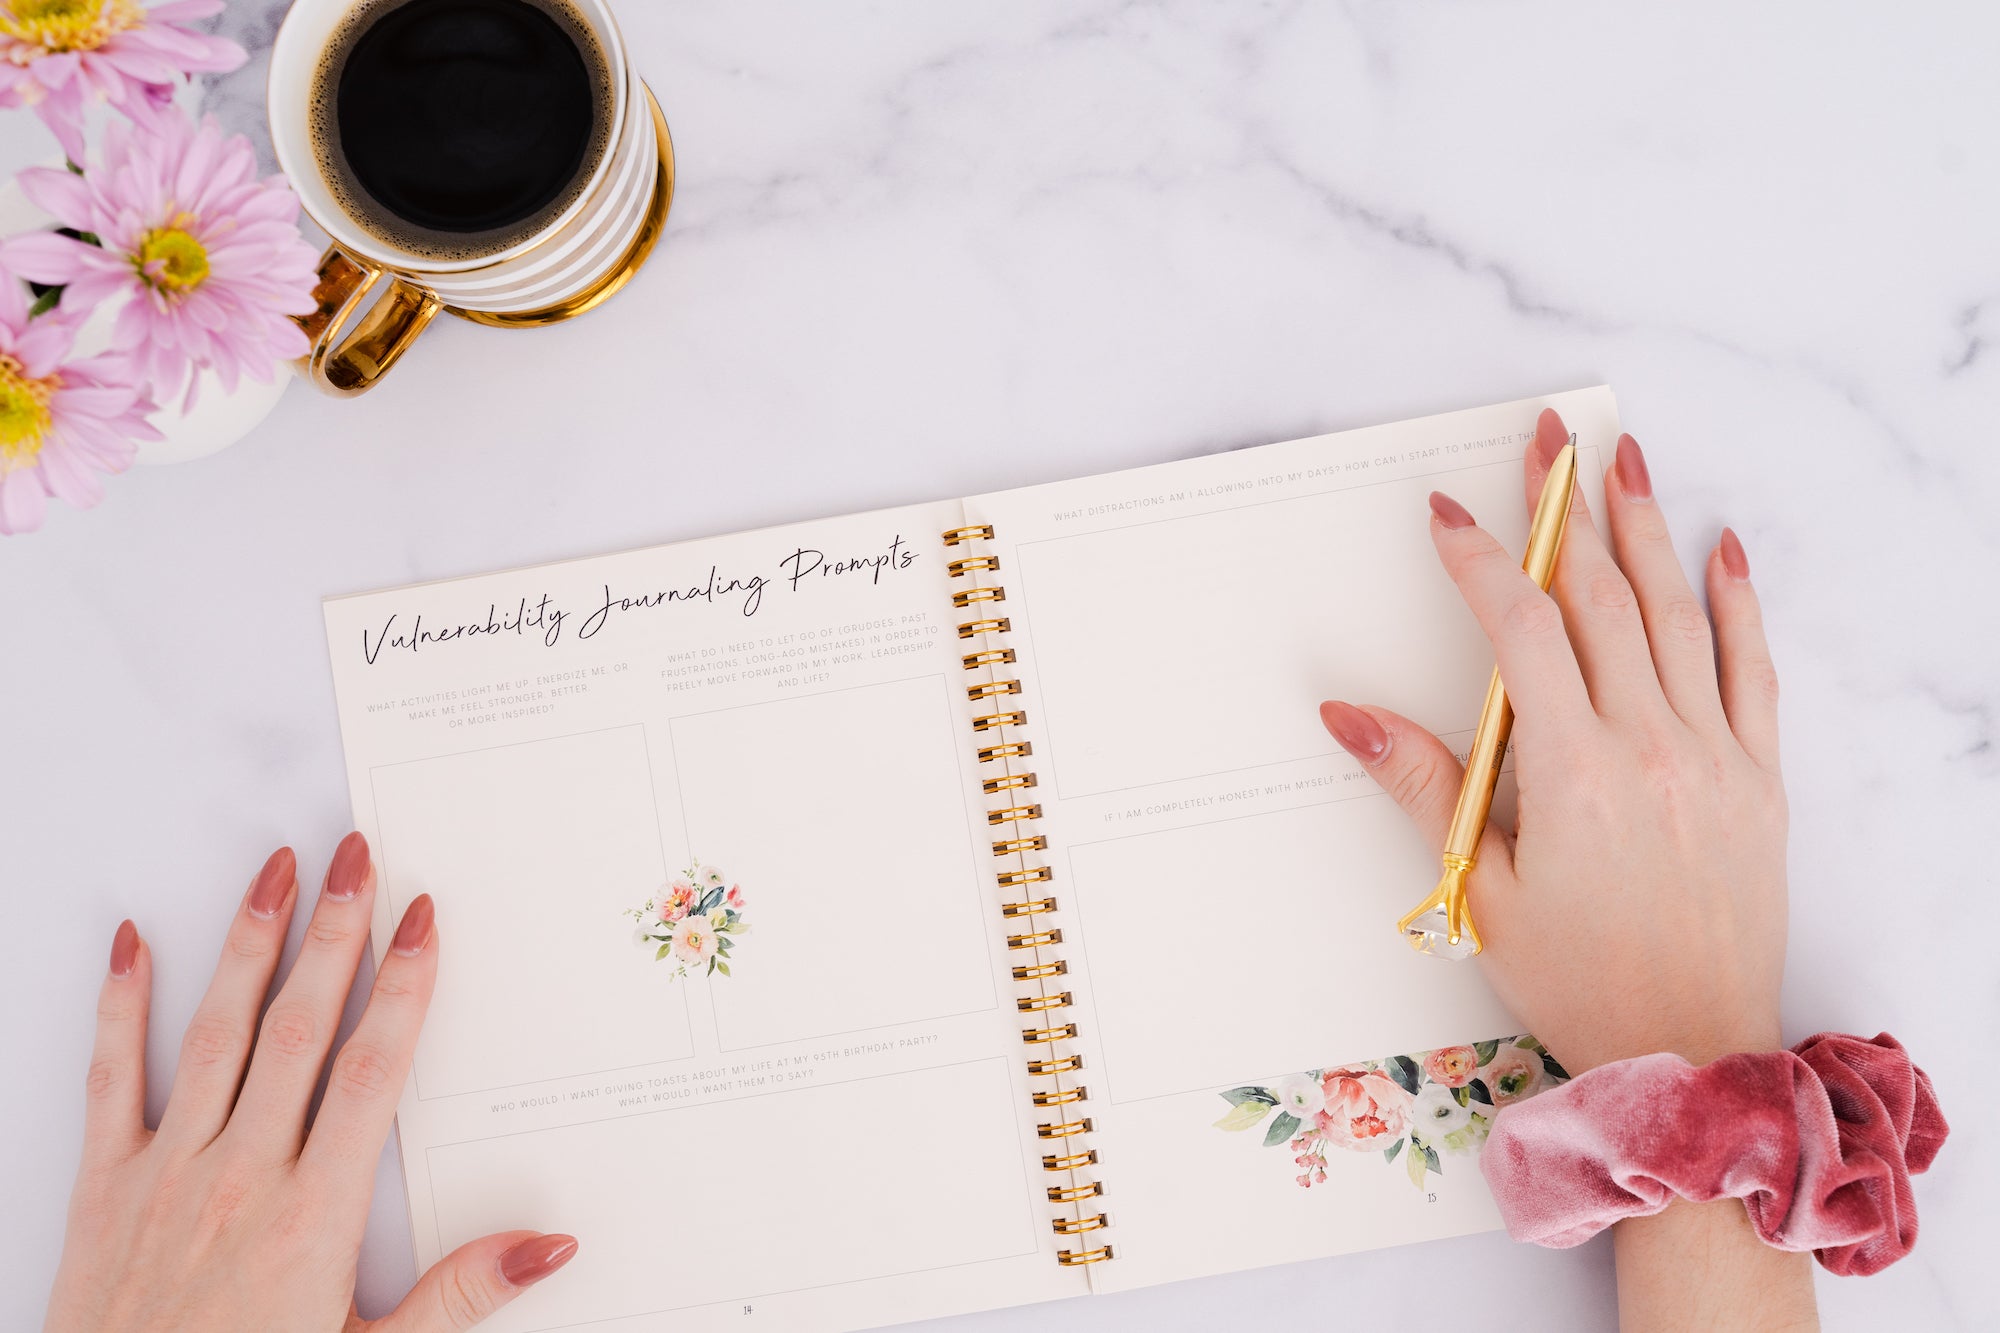 Journaling Has Some Serious Health Benefits—Here Are 4 You Need to Know About